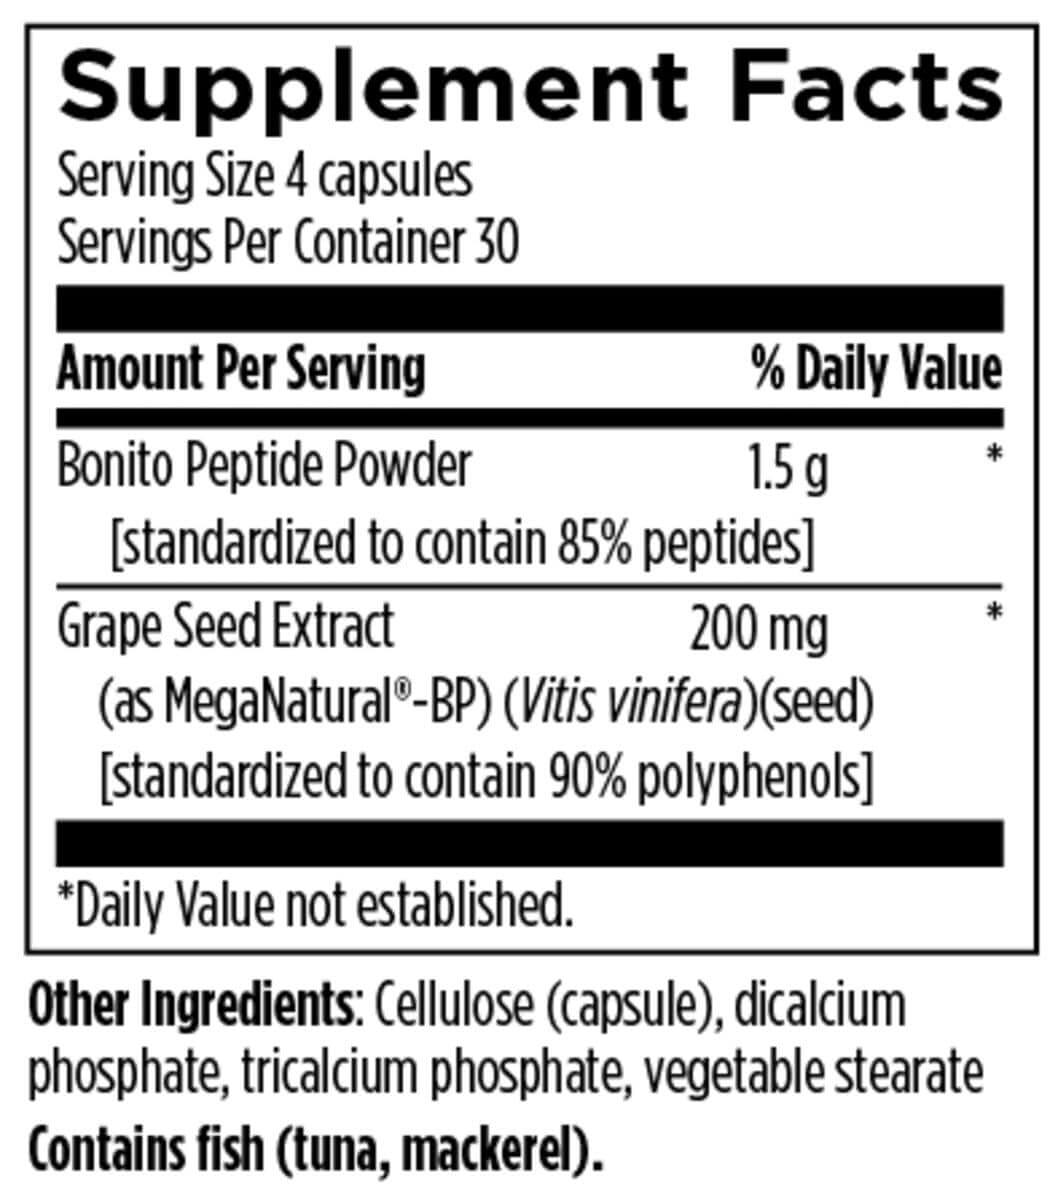 HTN Supreme - 120 cap Designs for Health Supplement - Conners Clinic